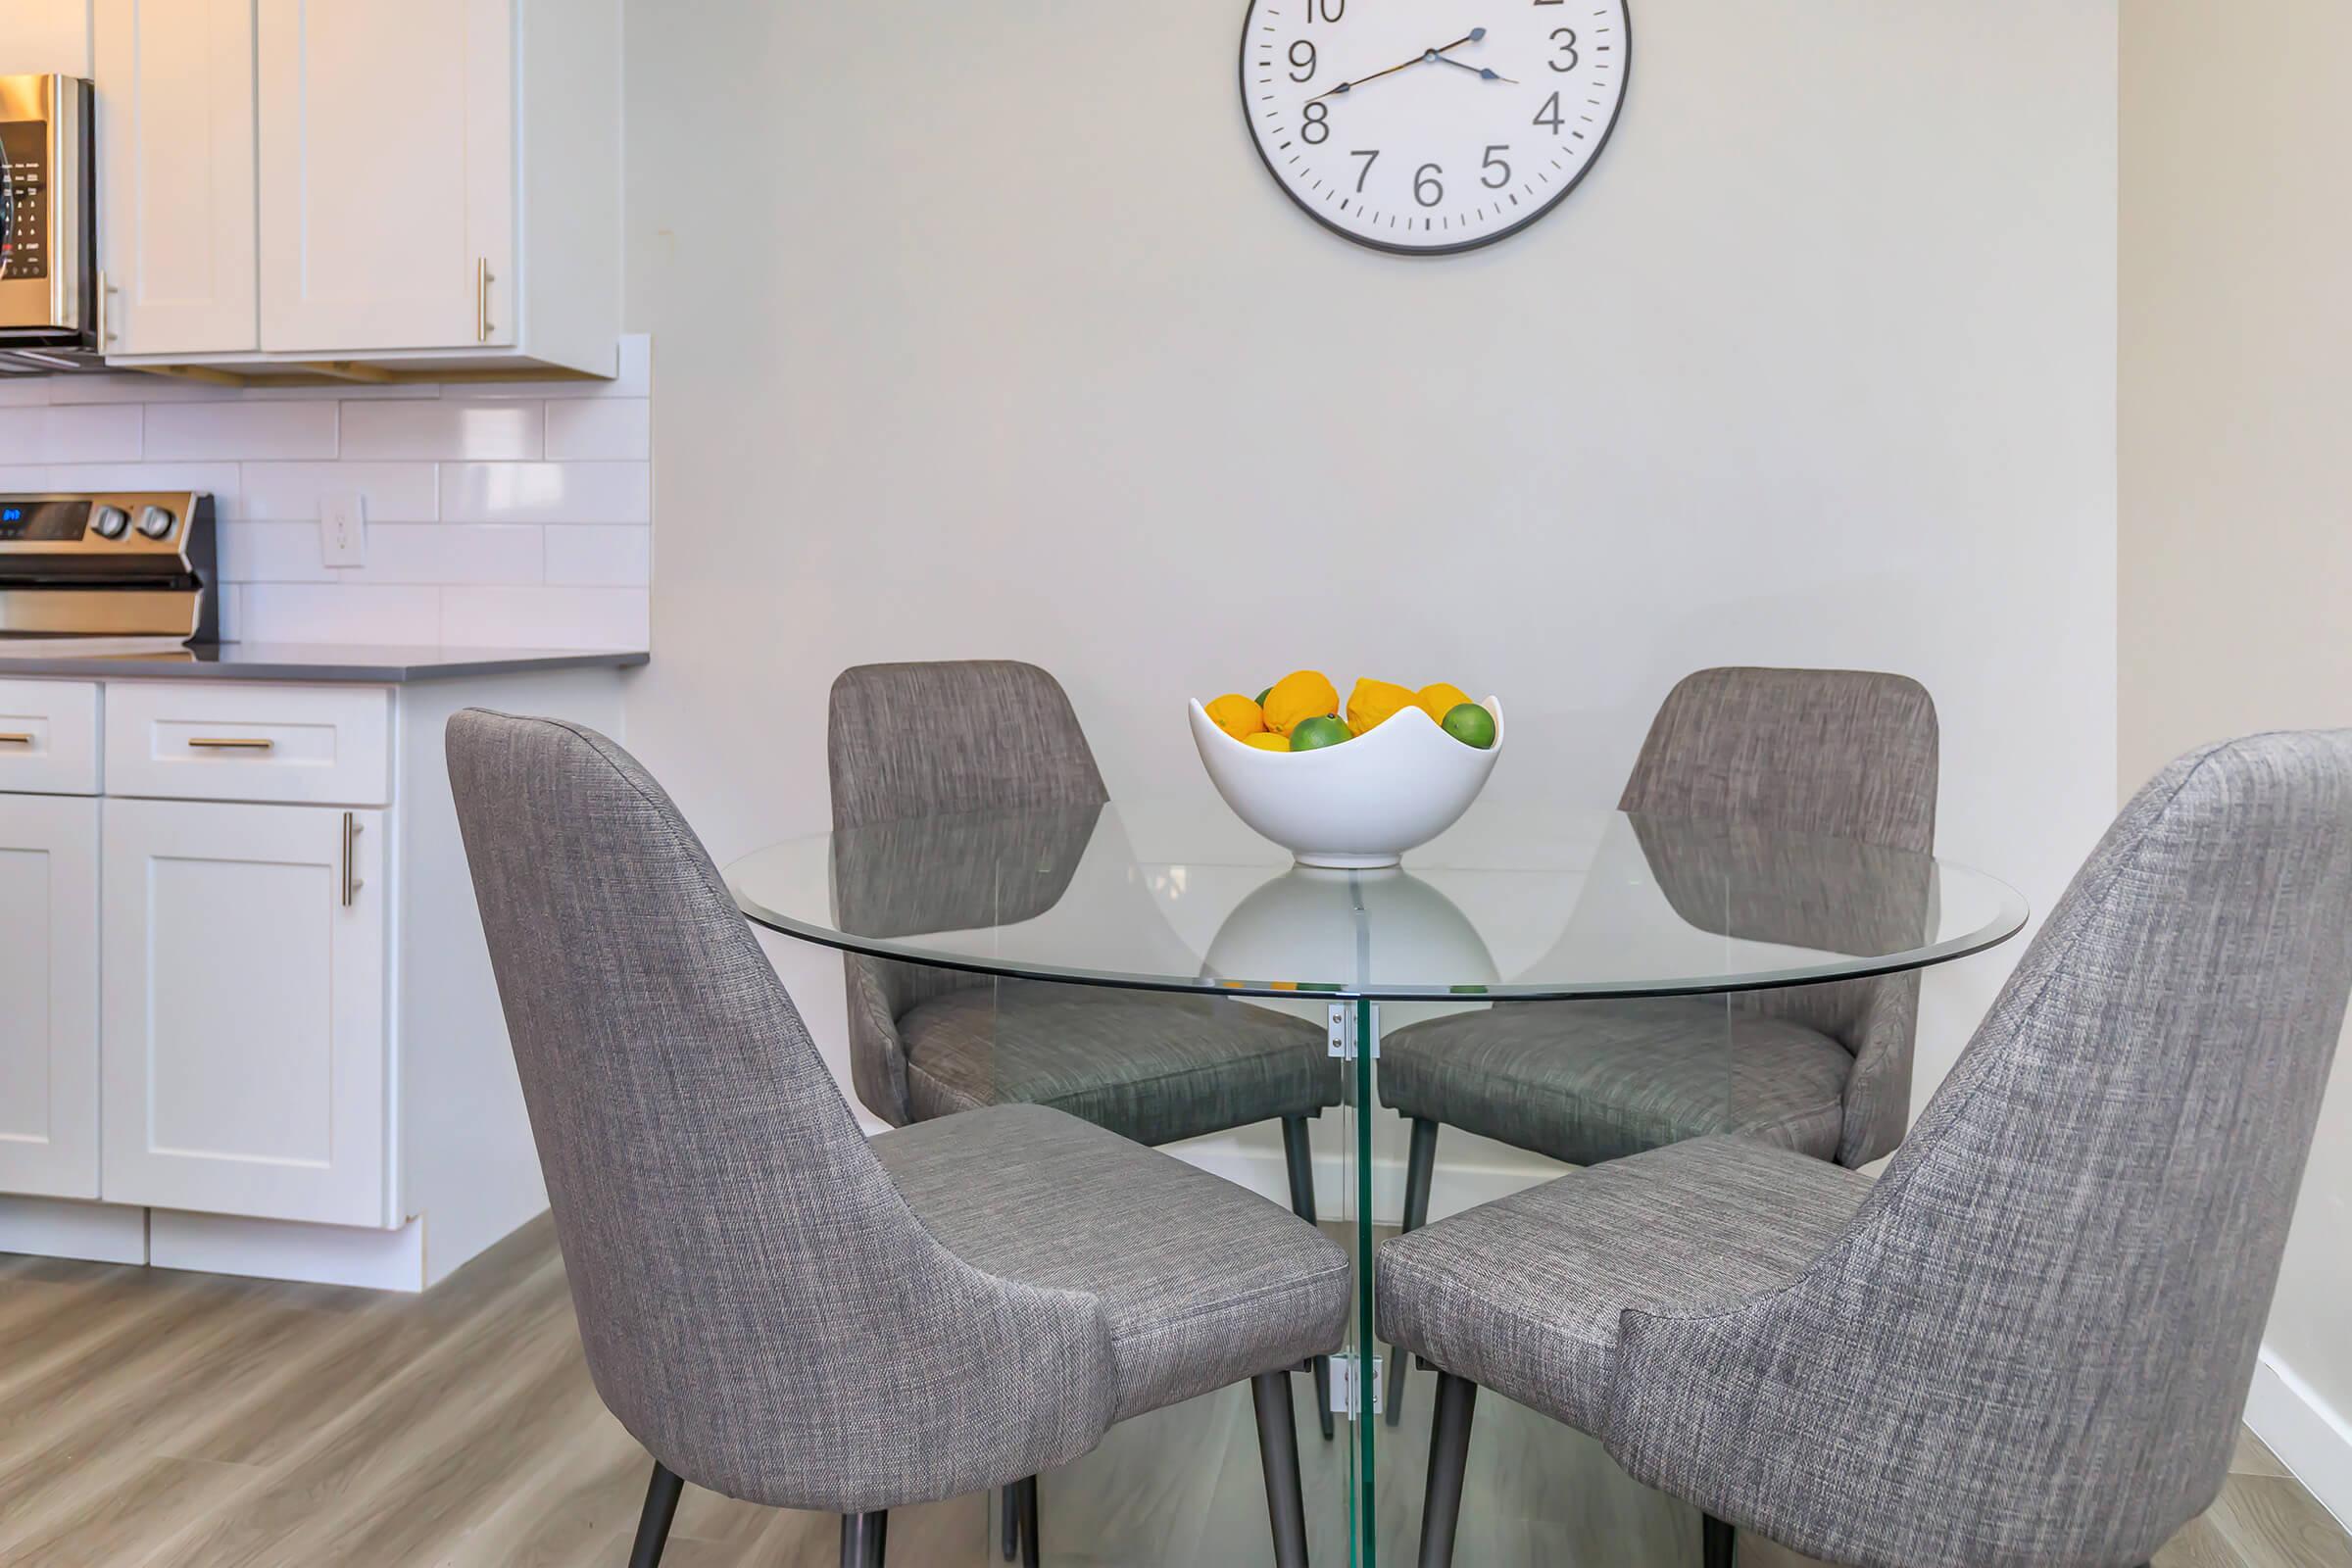 Dining room area with round glass table and grey chairs